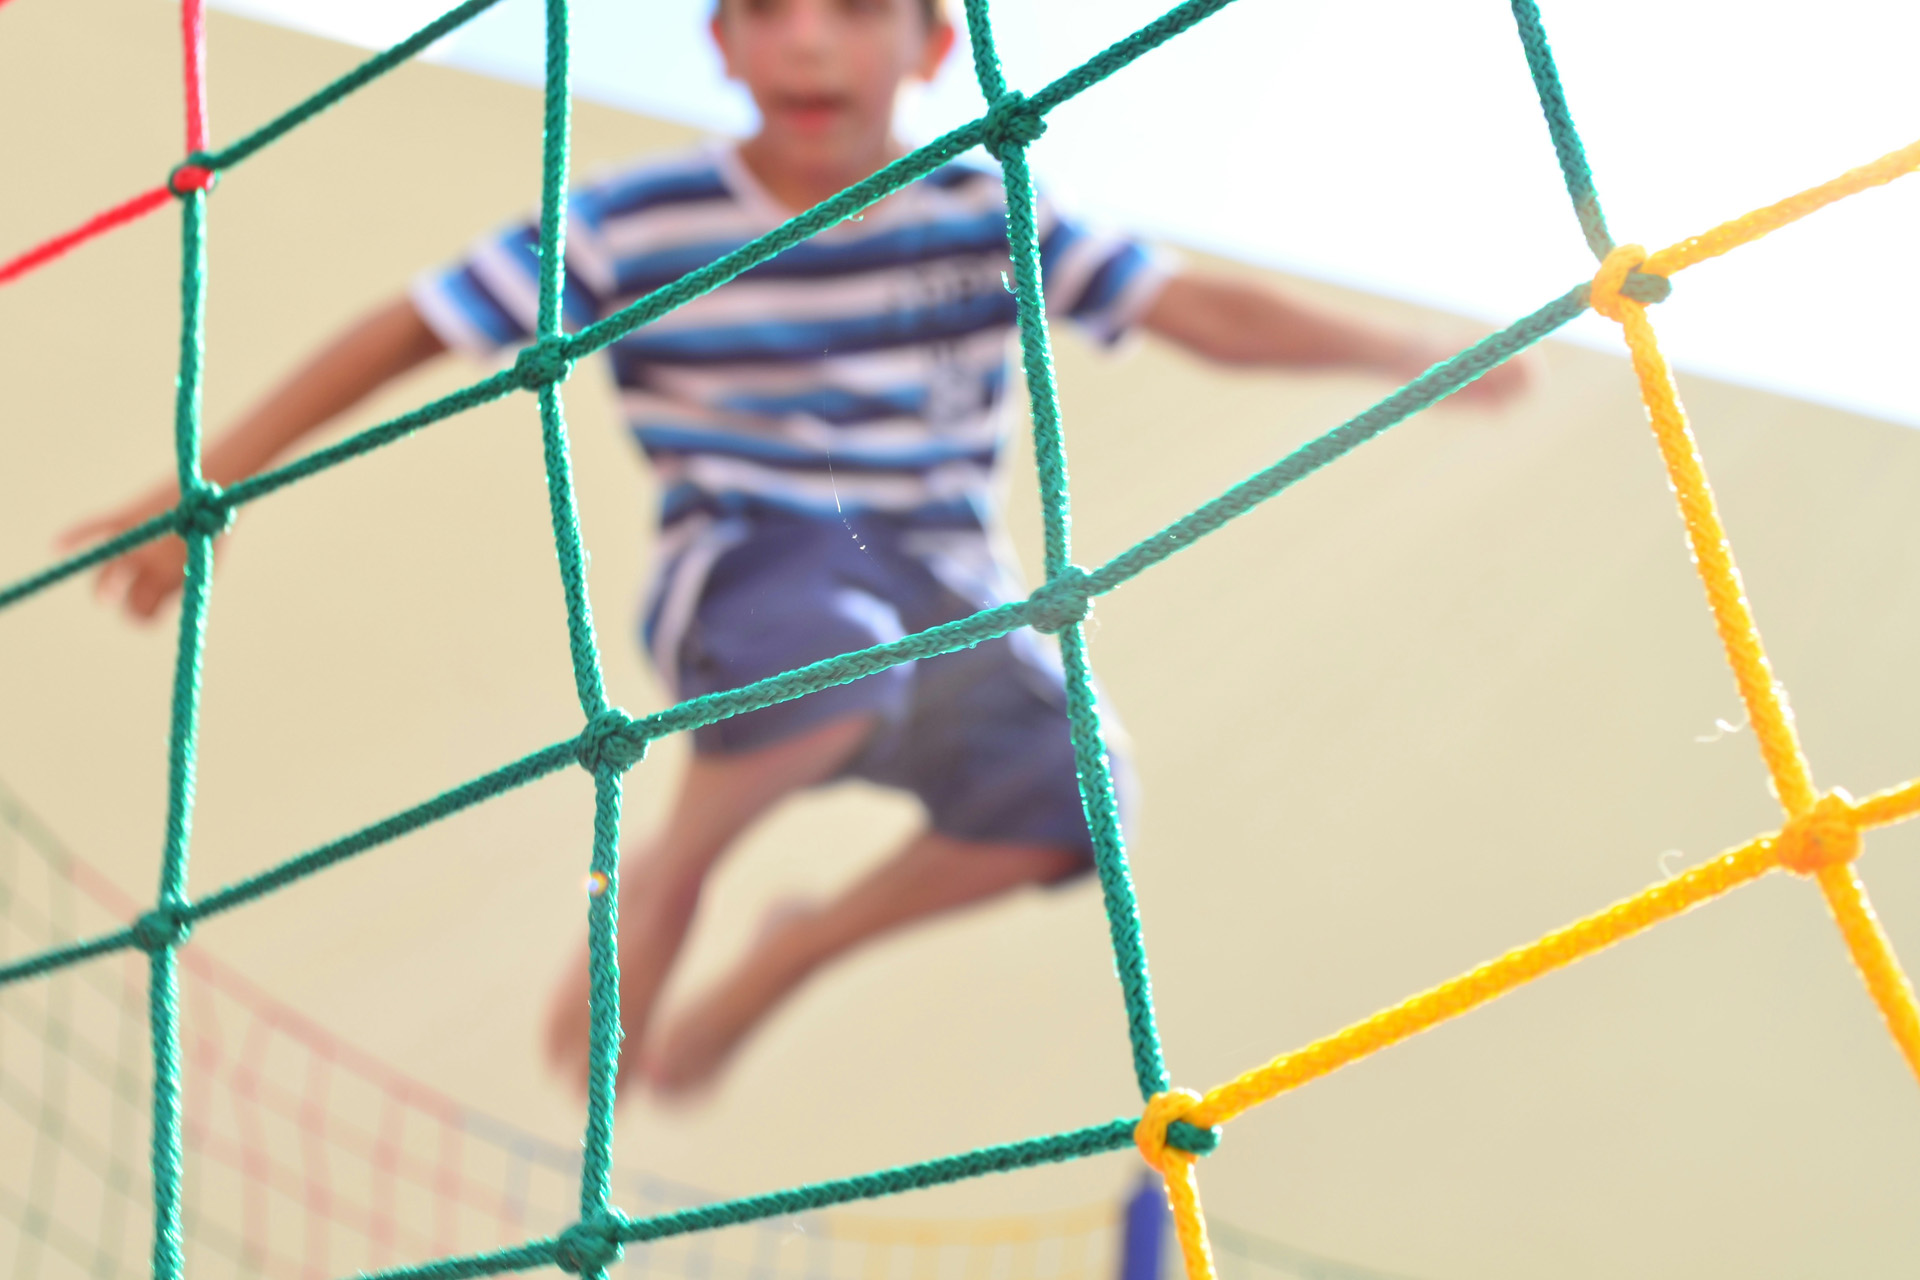 A young boy bouncing on an indoor trampoline